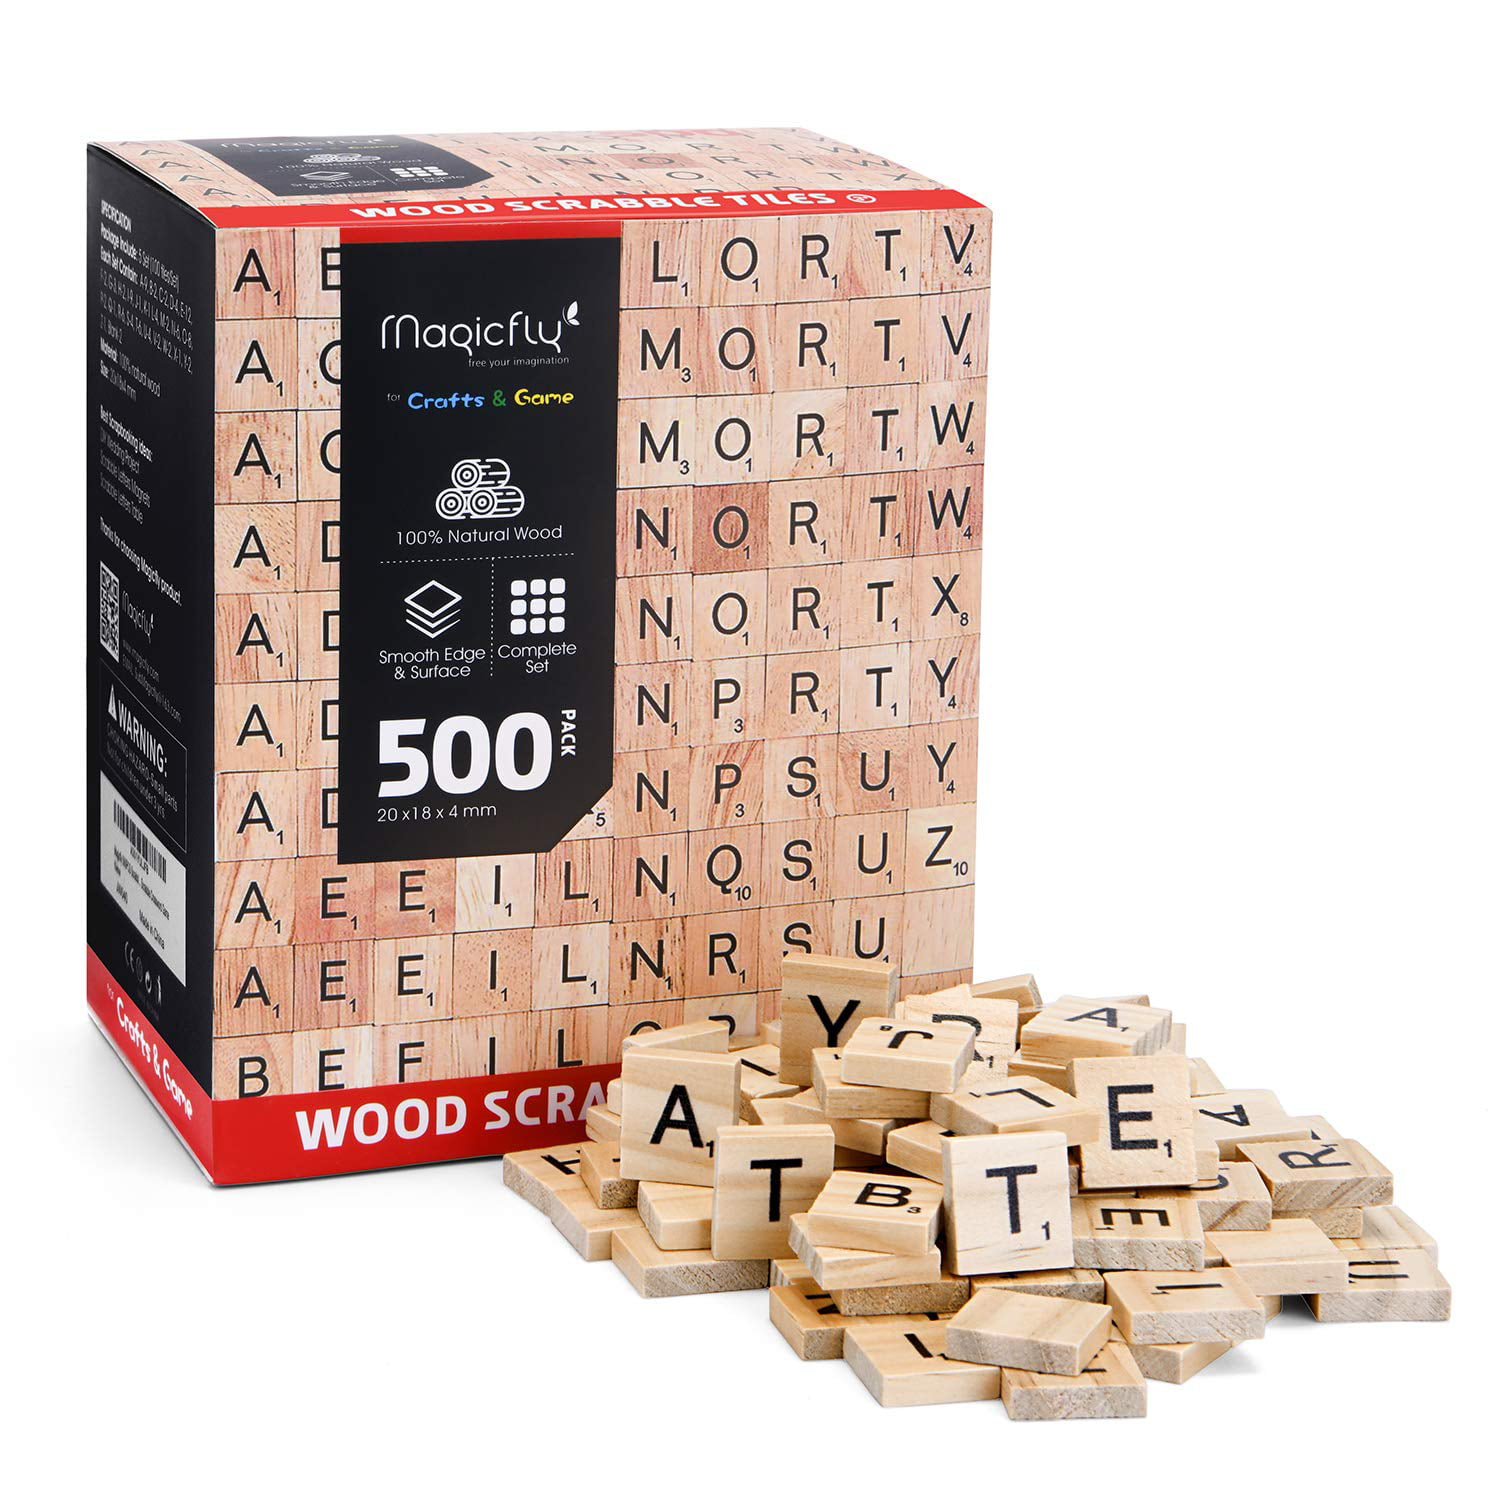 Wood Craft Scrabble Letters Word Tiles Magicfly 500Pcs Scrabble Tiles A-Z for Wood Gift Decoration & Scrabble Crossword Game